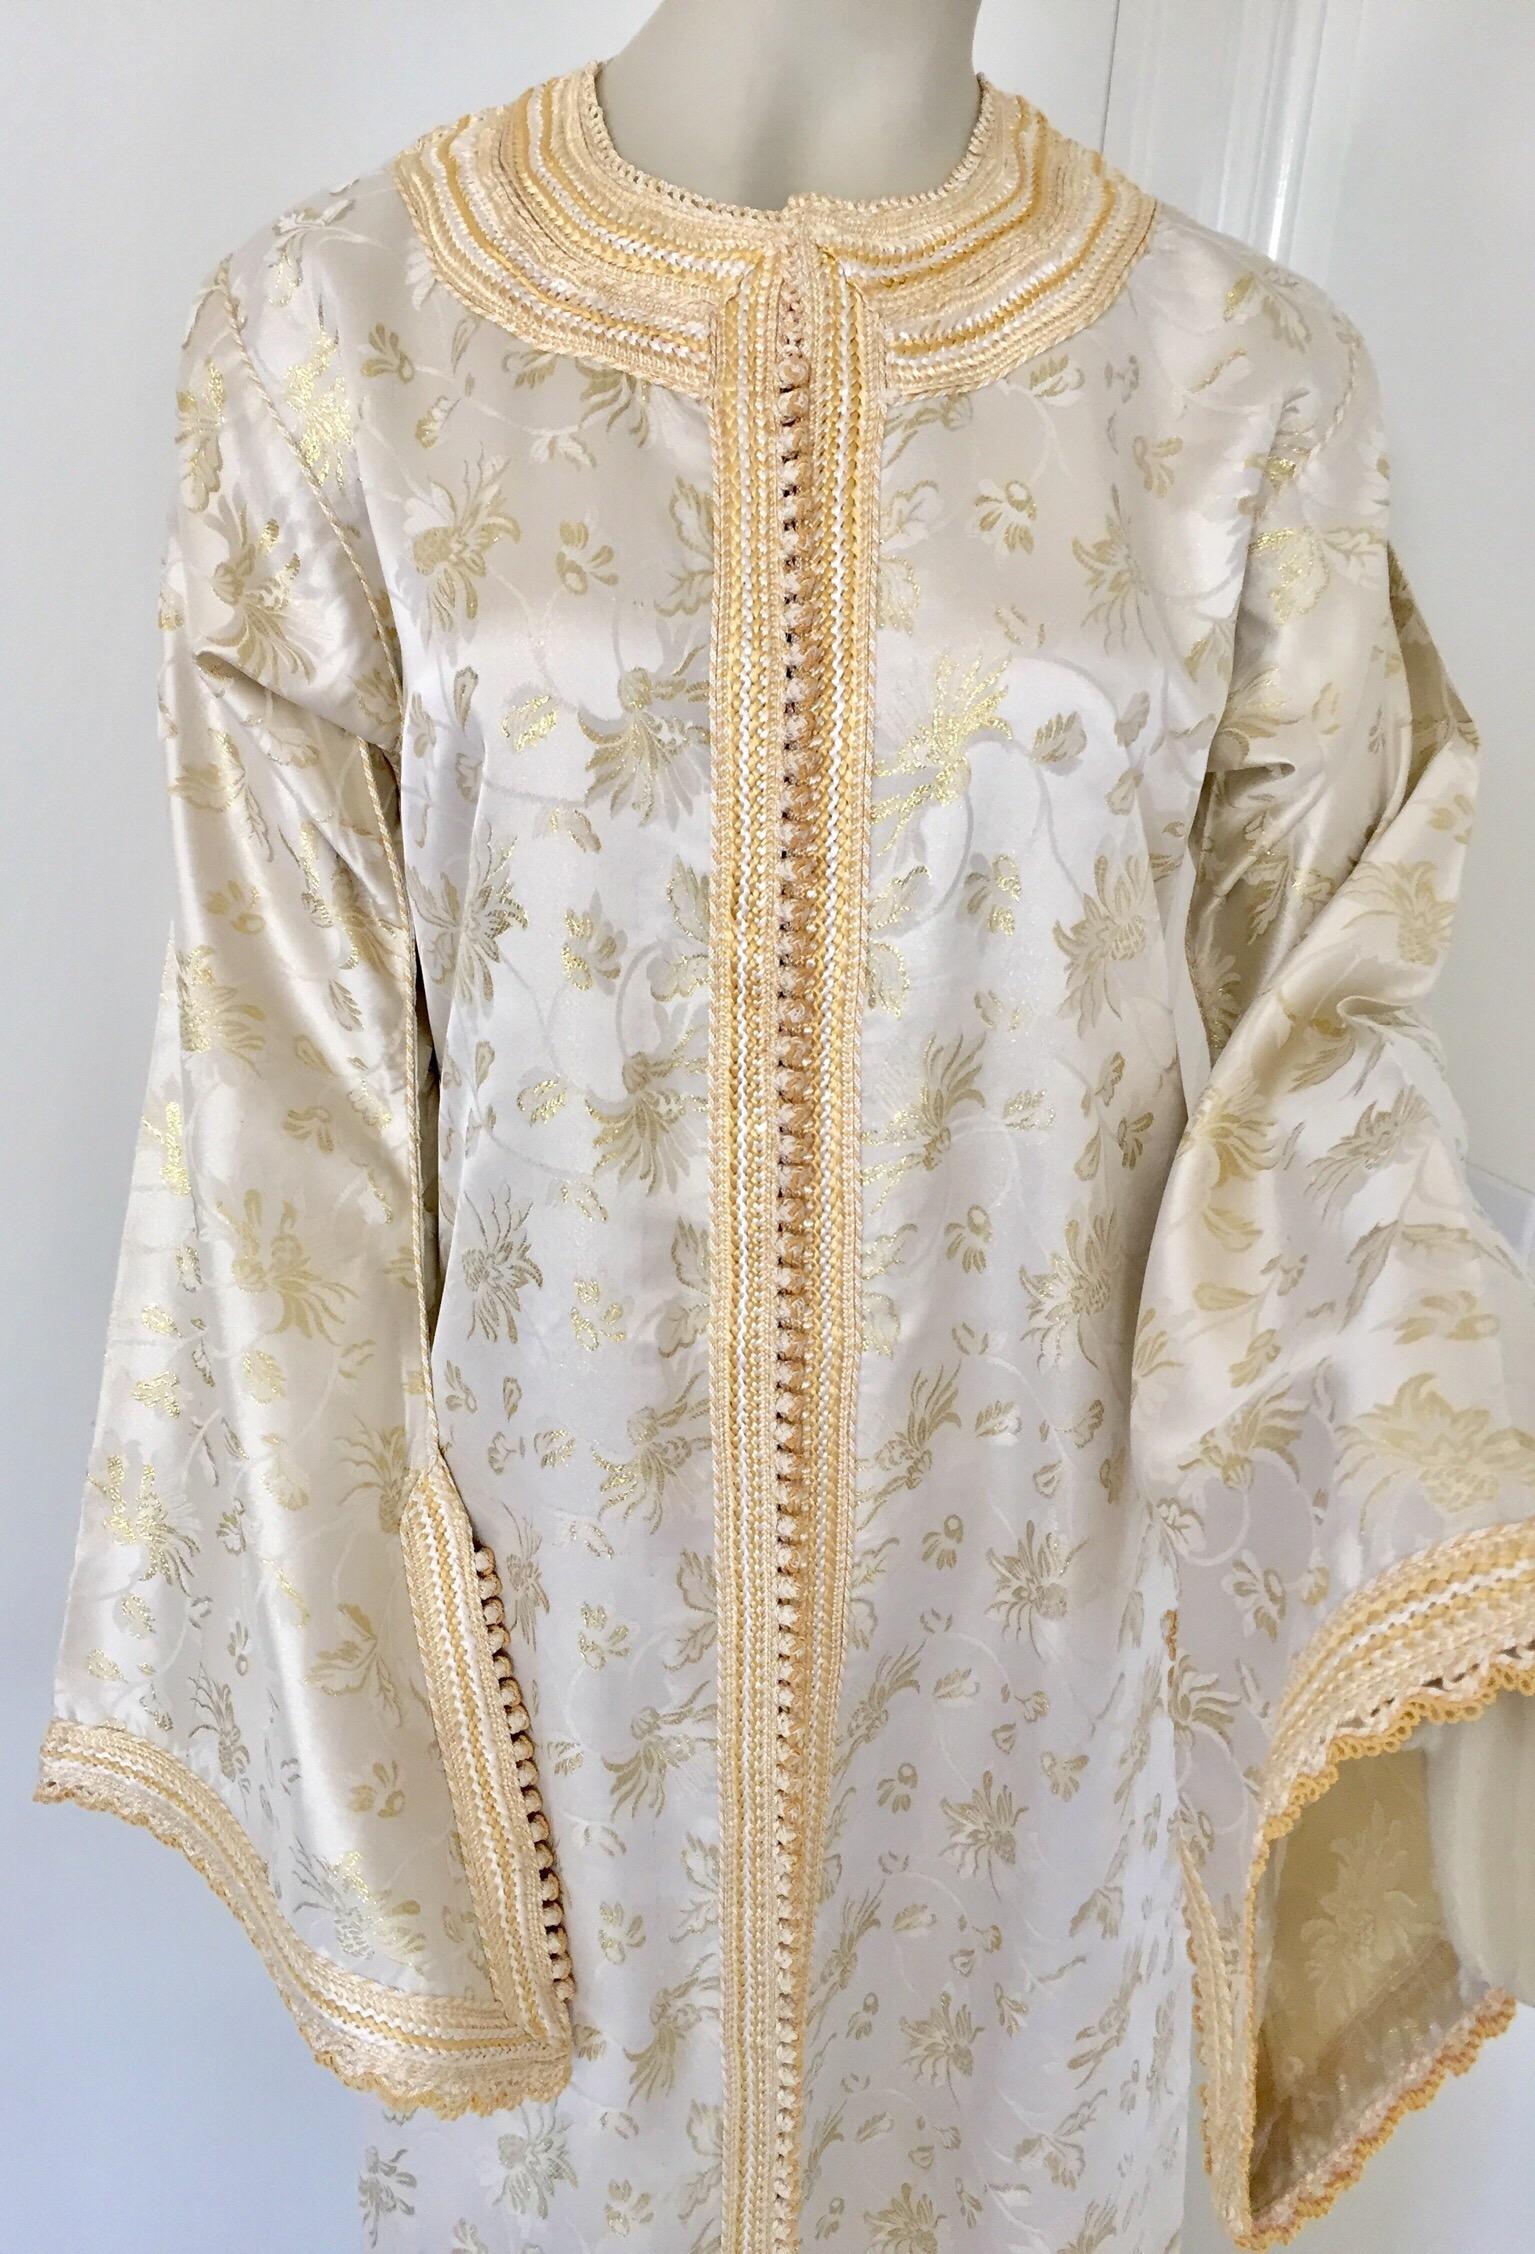 Vintage Moroccan Kaftan White and Gold Metallic Floral Brocade Caftan 1970's For Sale 6